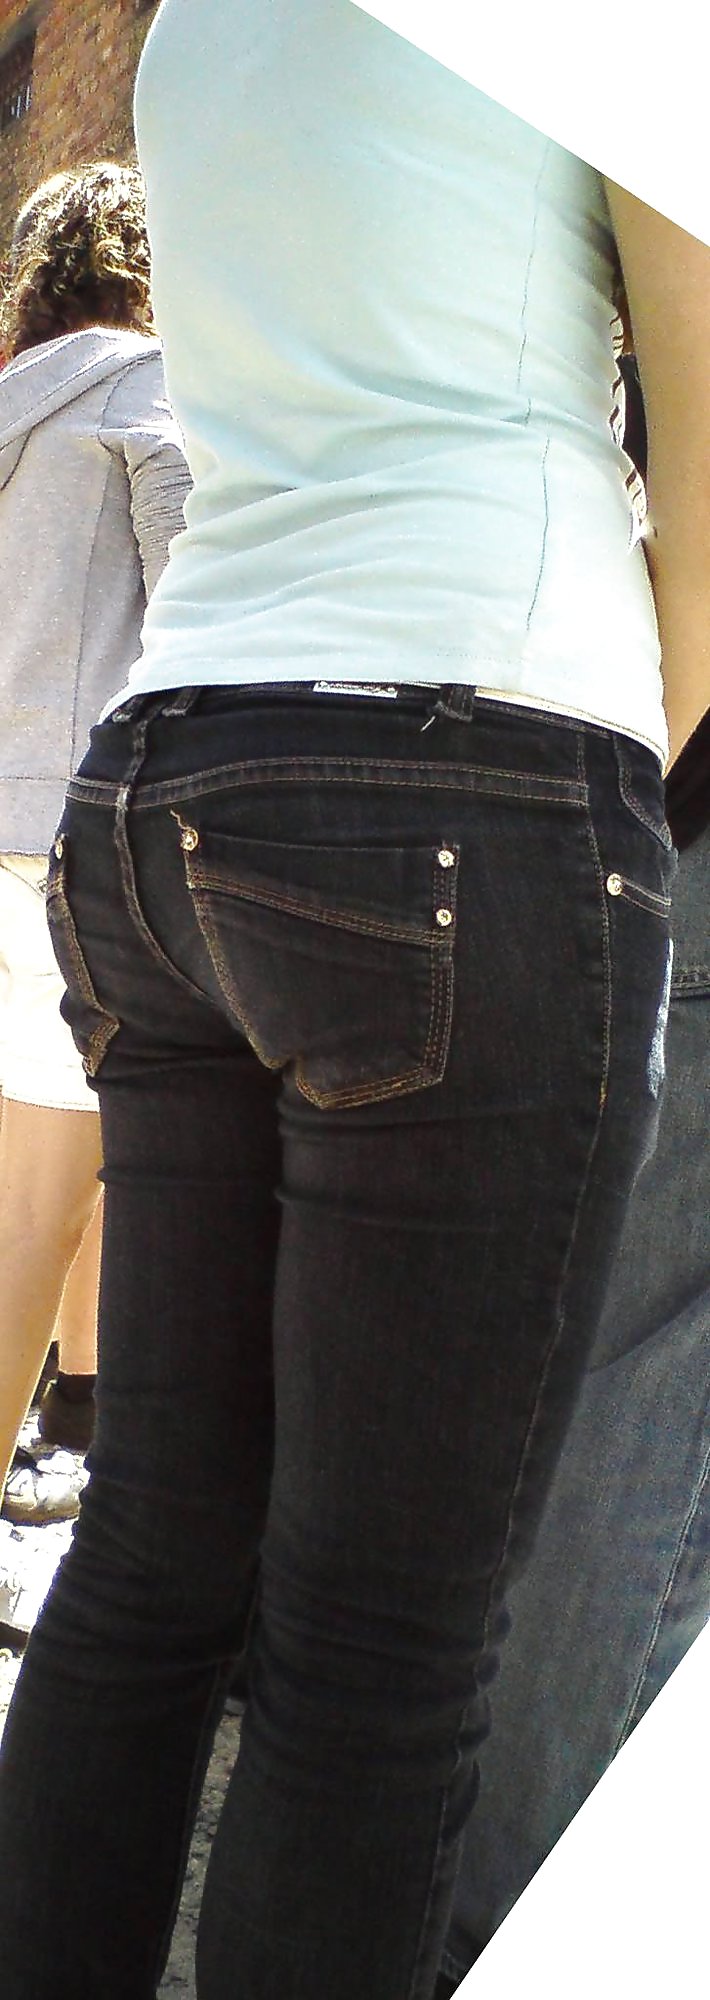 Candid teen ass in jeans #23904543